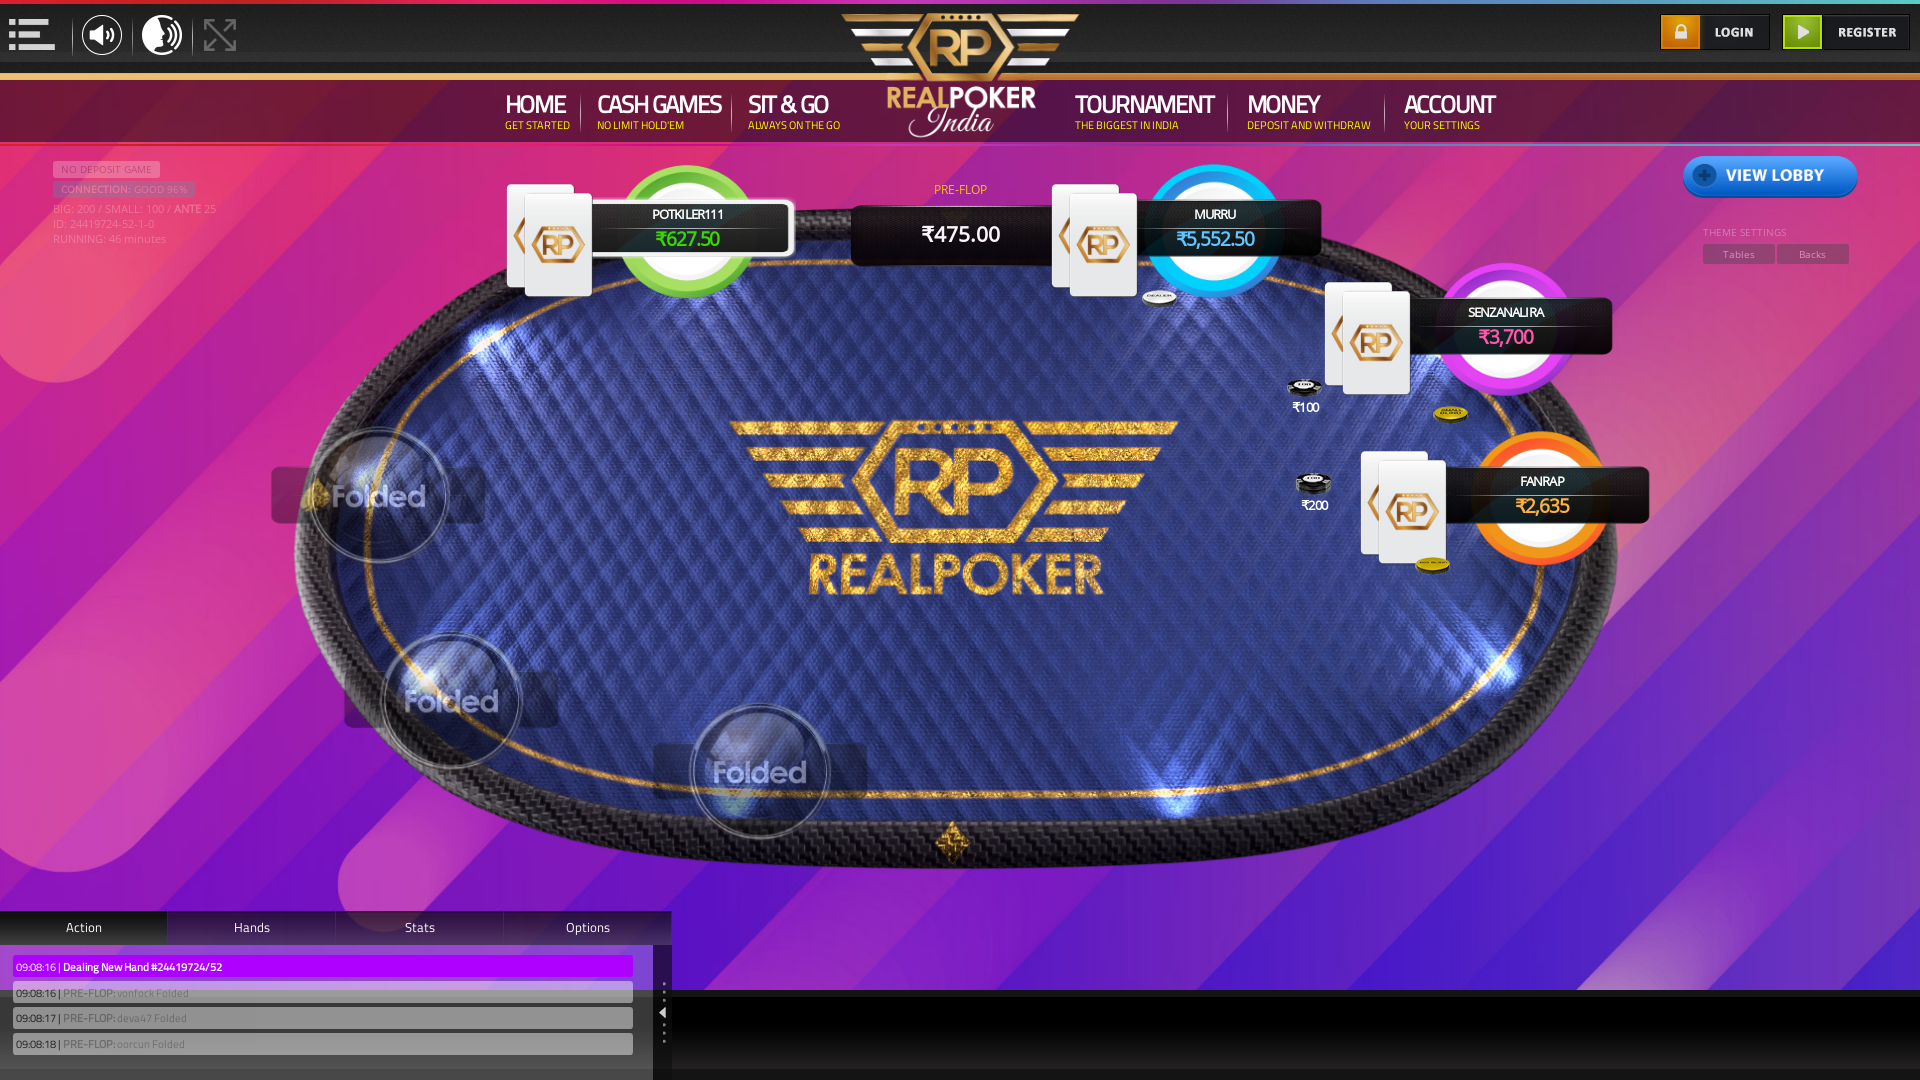 Goregaon, Mumbai online poker game on a 10 player table in the 46th minute of the game